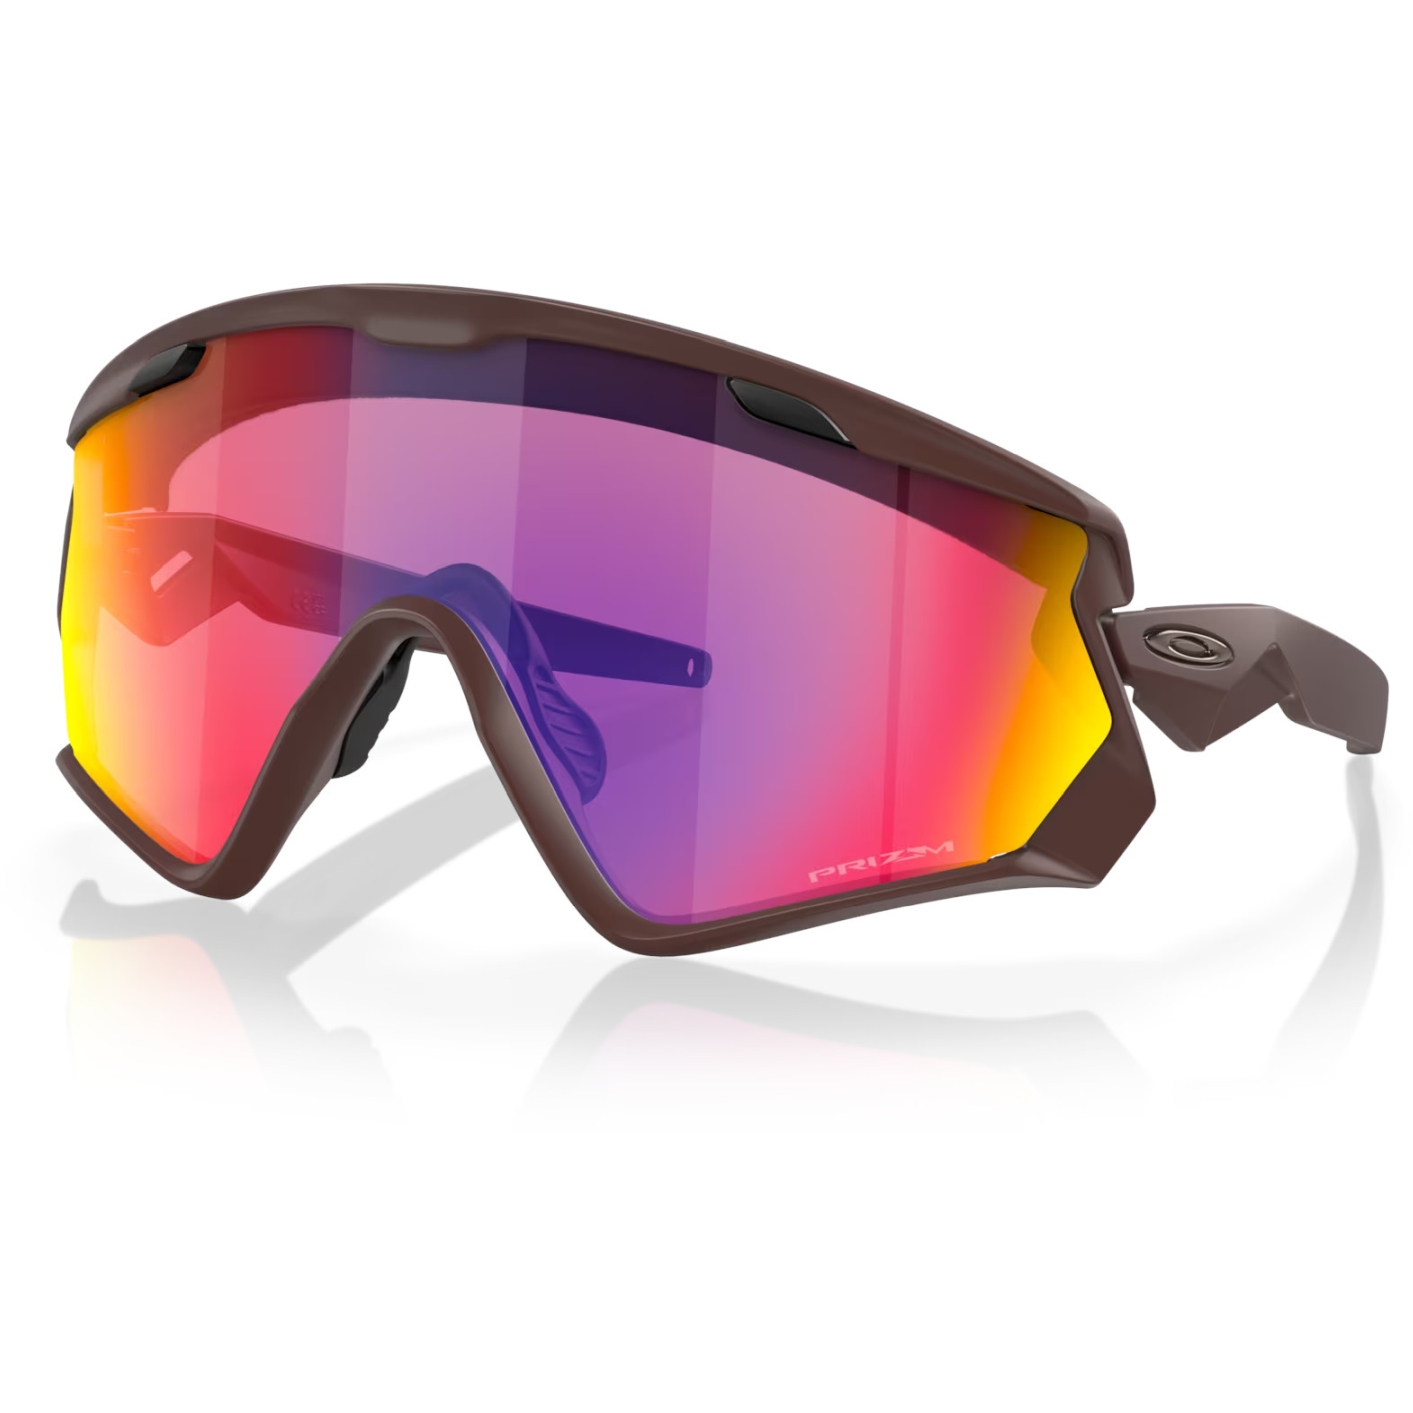 REAL Review 24.02 | Oakley 13.11 - YouTube